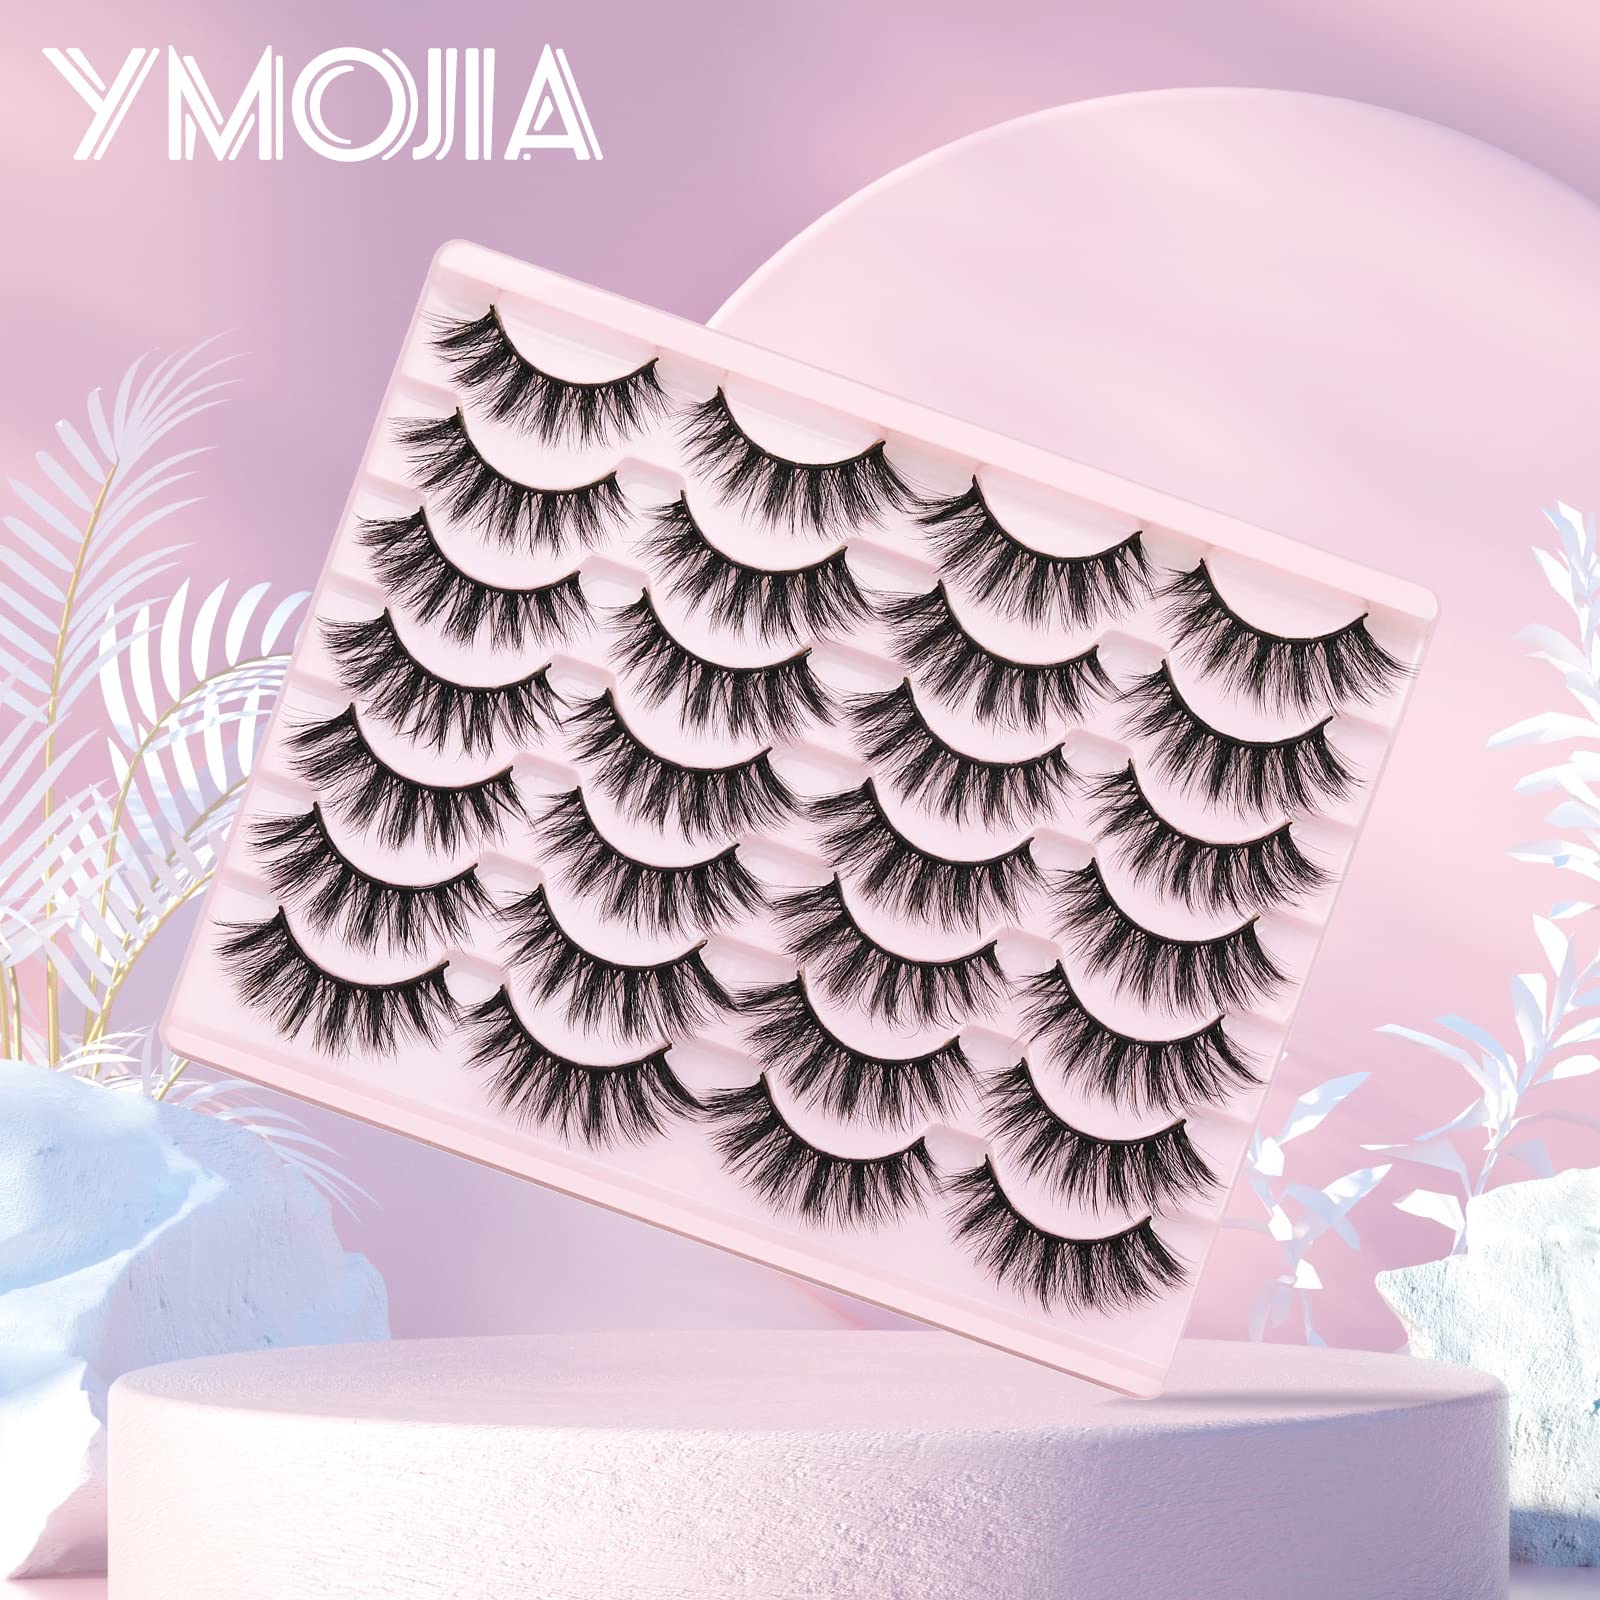 False Eyelashes Fluffy Faux Mink Lashes Natural Look, 14 Pairs Pack Reusable 15MM 3D Fake Eyelashes - Lightweight & Comfortable Cat Eye Wispy Lashes Easy To Apply, Contact Lens Friendly, Cruelty-Free